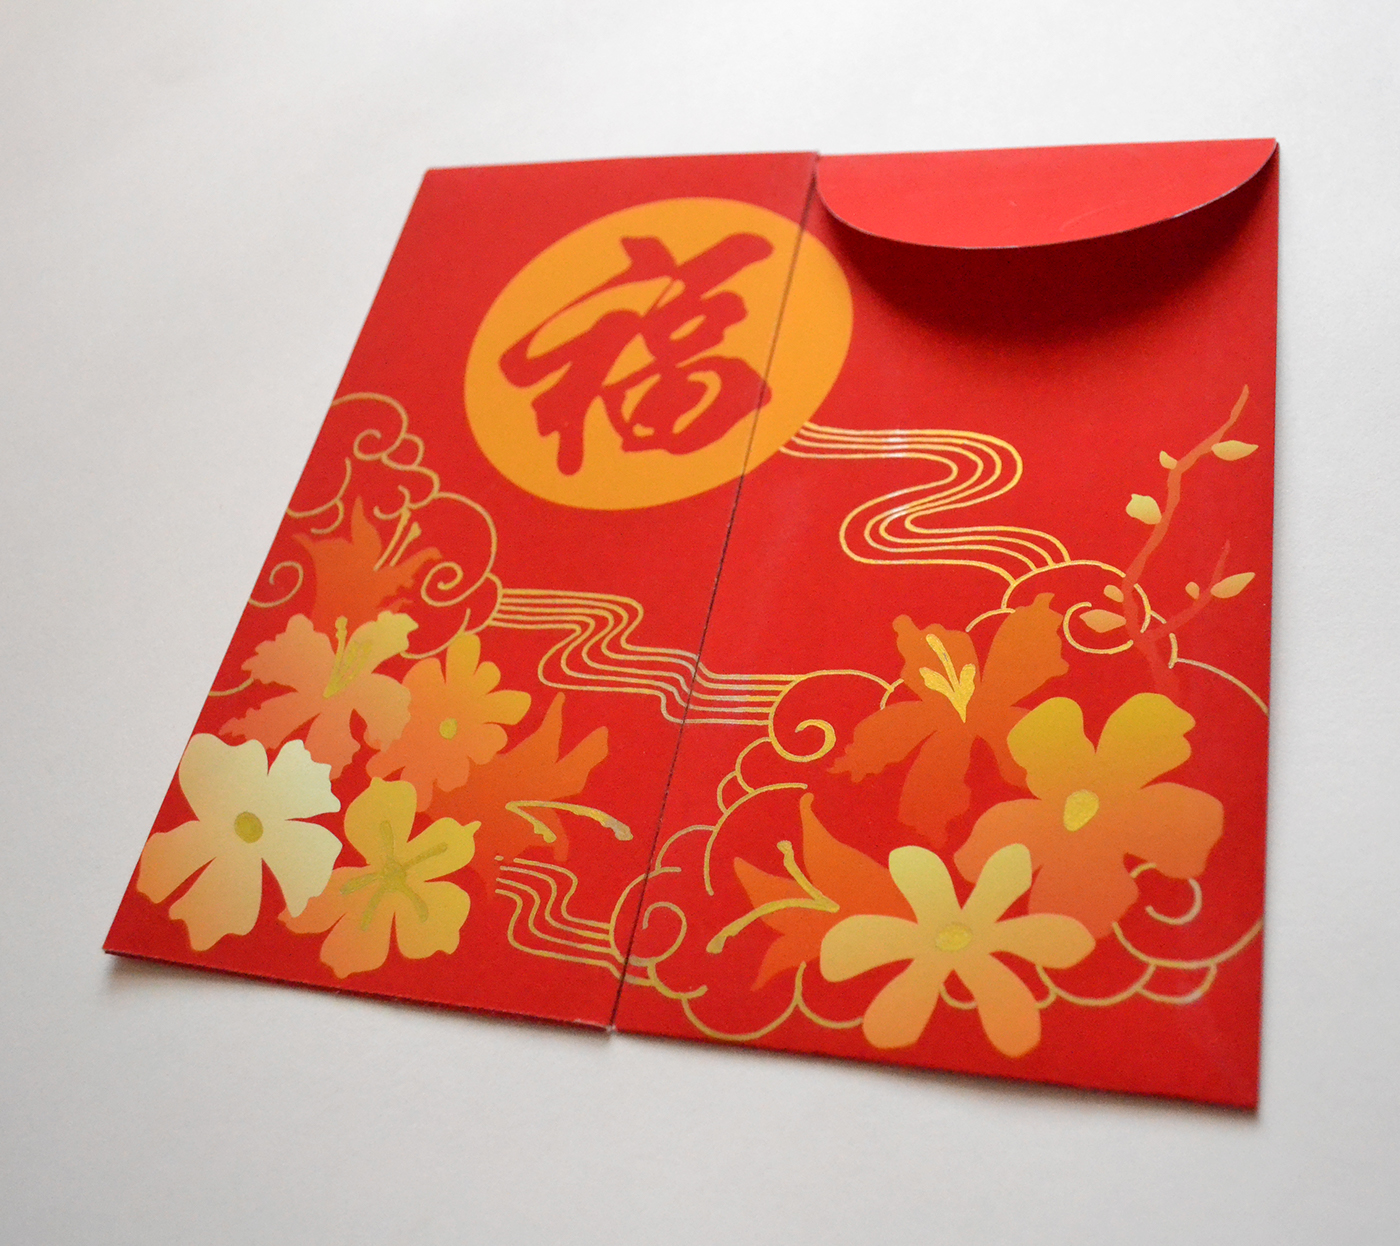 chinese new year red envelope package gift new year gold handmade ILLUSTRATION  money